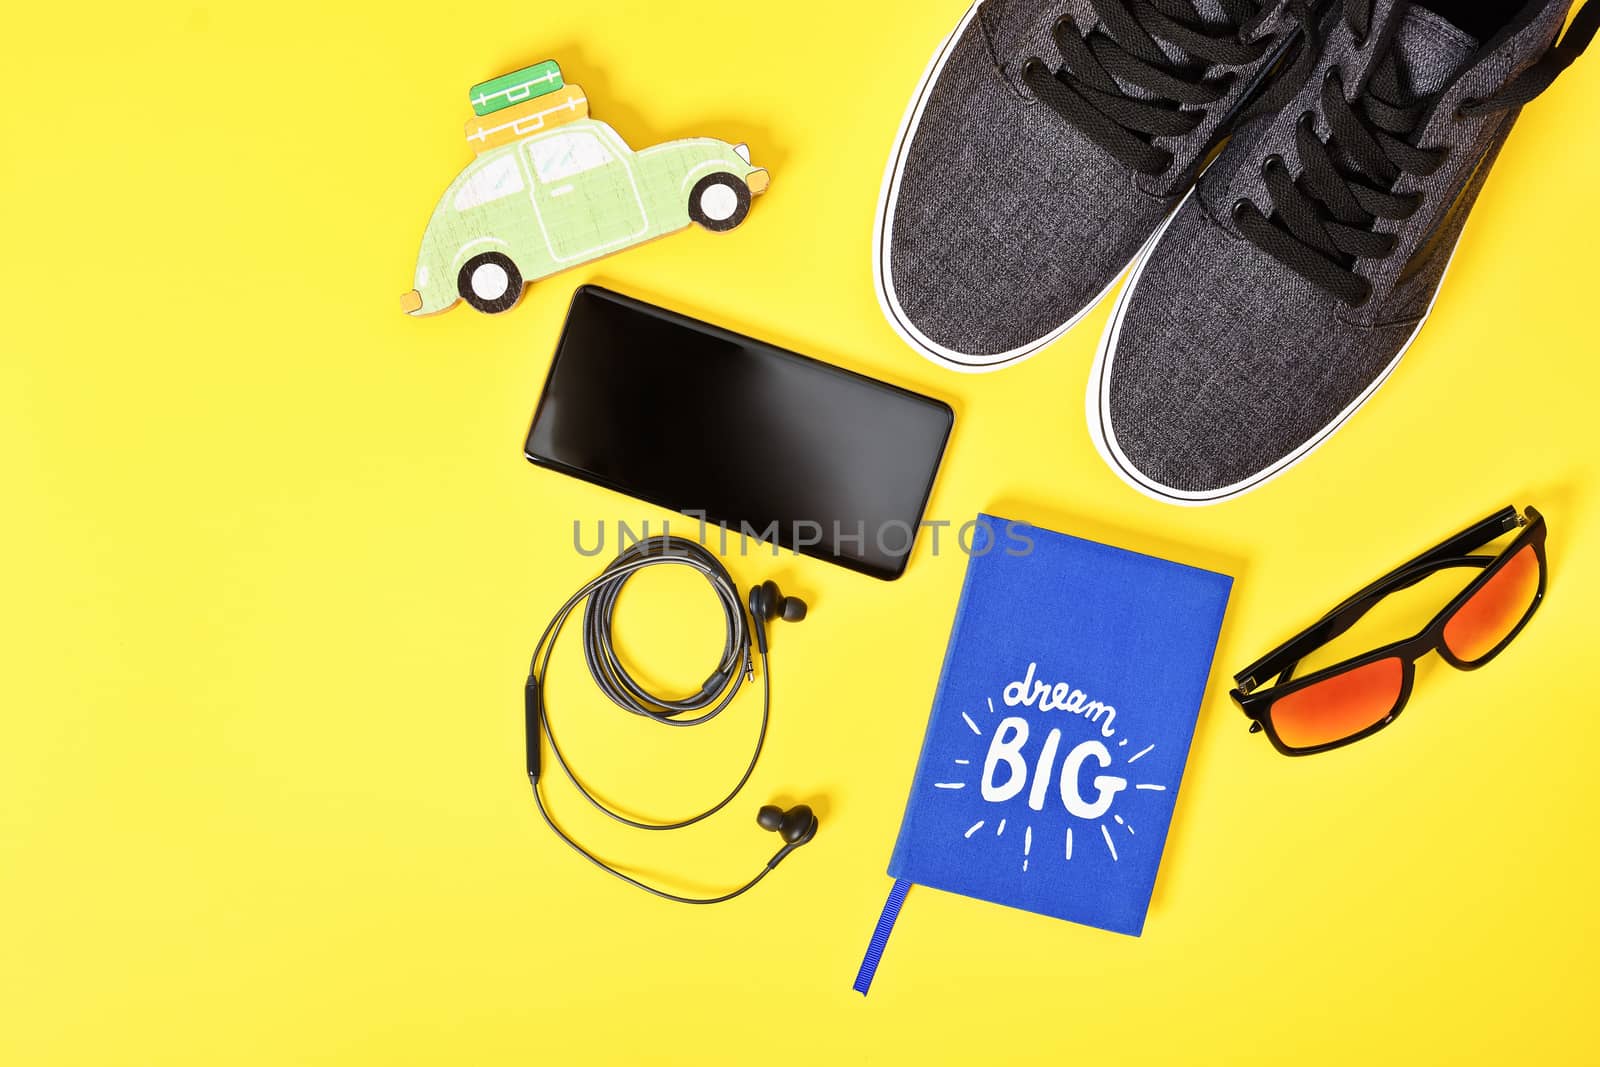 Travel planning, vacation and tourism concept. Top view of traveler's essential accessories including sneakers, sunglasses, smartphone, earphones and a Dream Big notepad on yellow background. Flat lay, copy space.